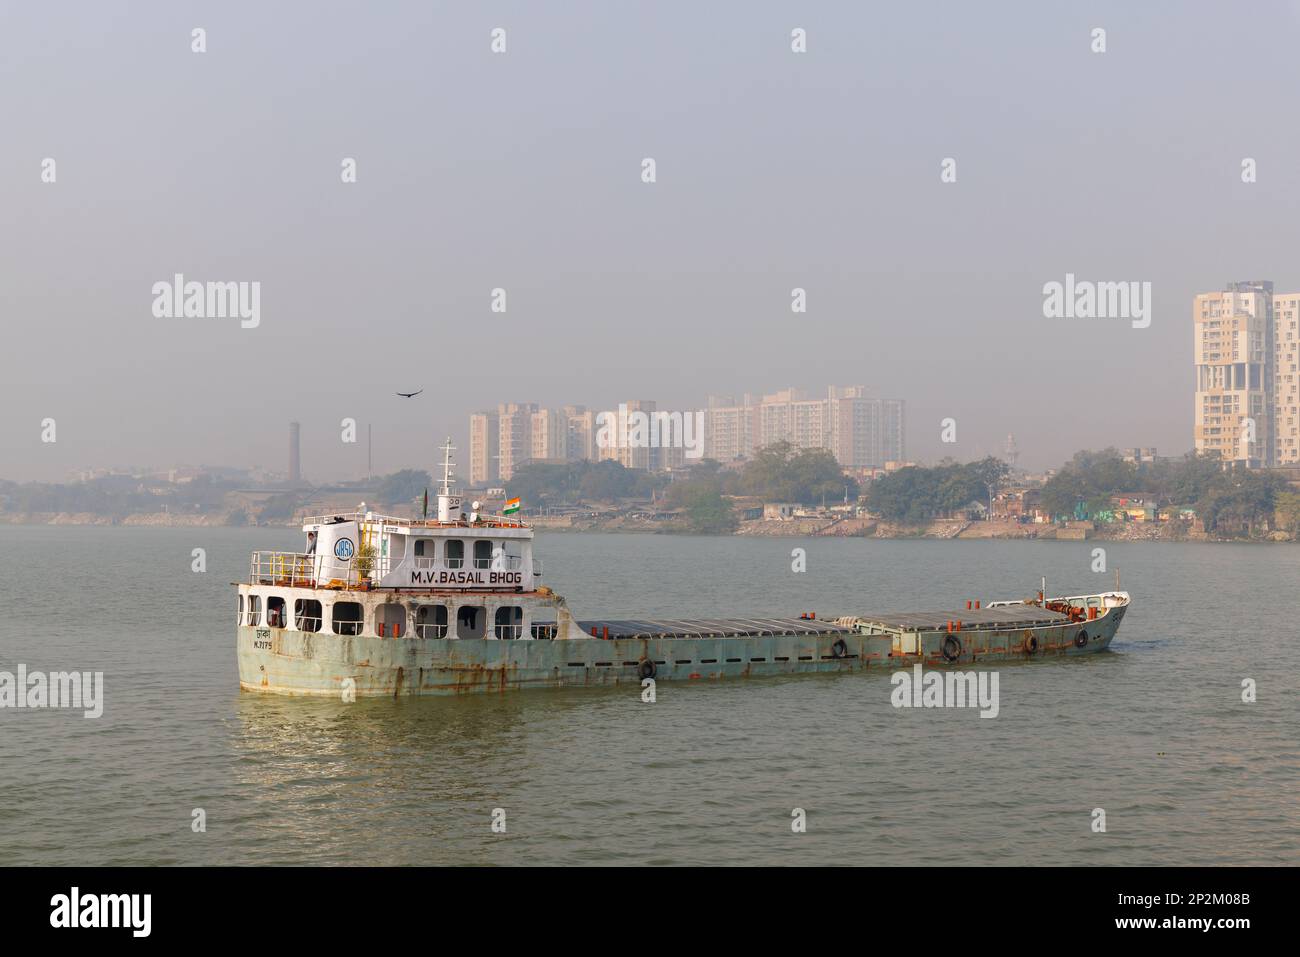 A boat moored and early morning smoggy atmosphere over the Hooghly River at Kolkata (Calcutta), capital city of West Bengal, India Stock Photo